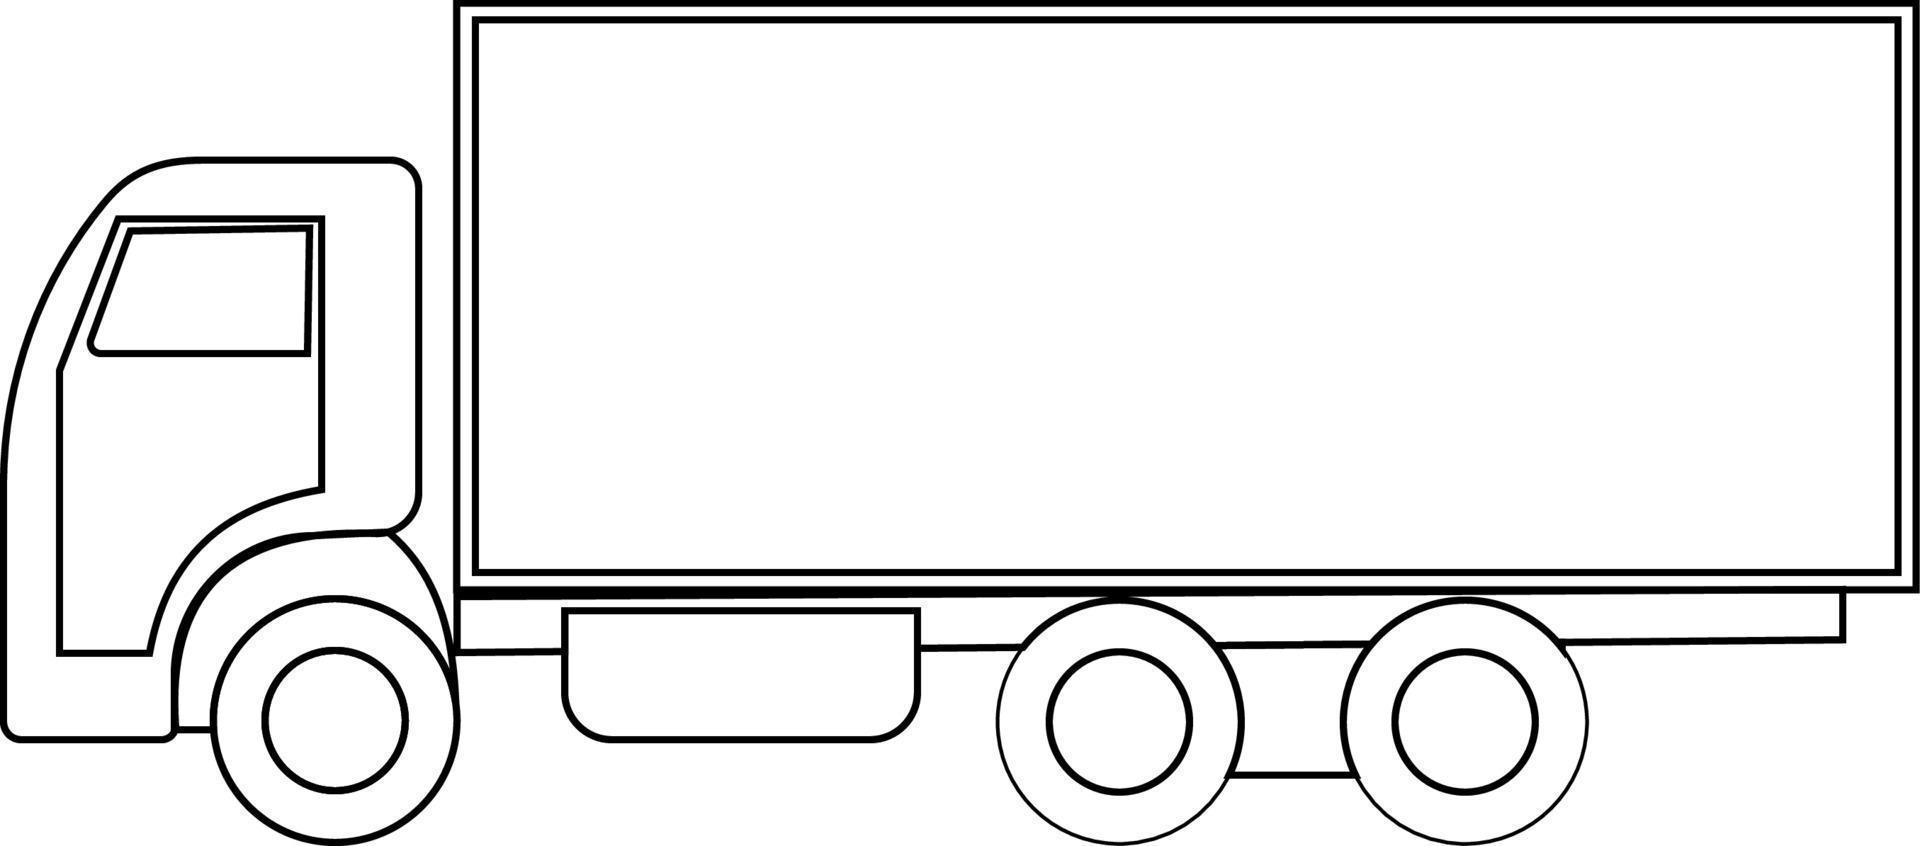 expedition truck outline vector